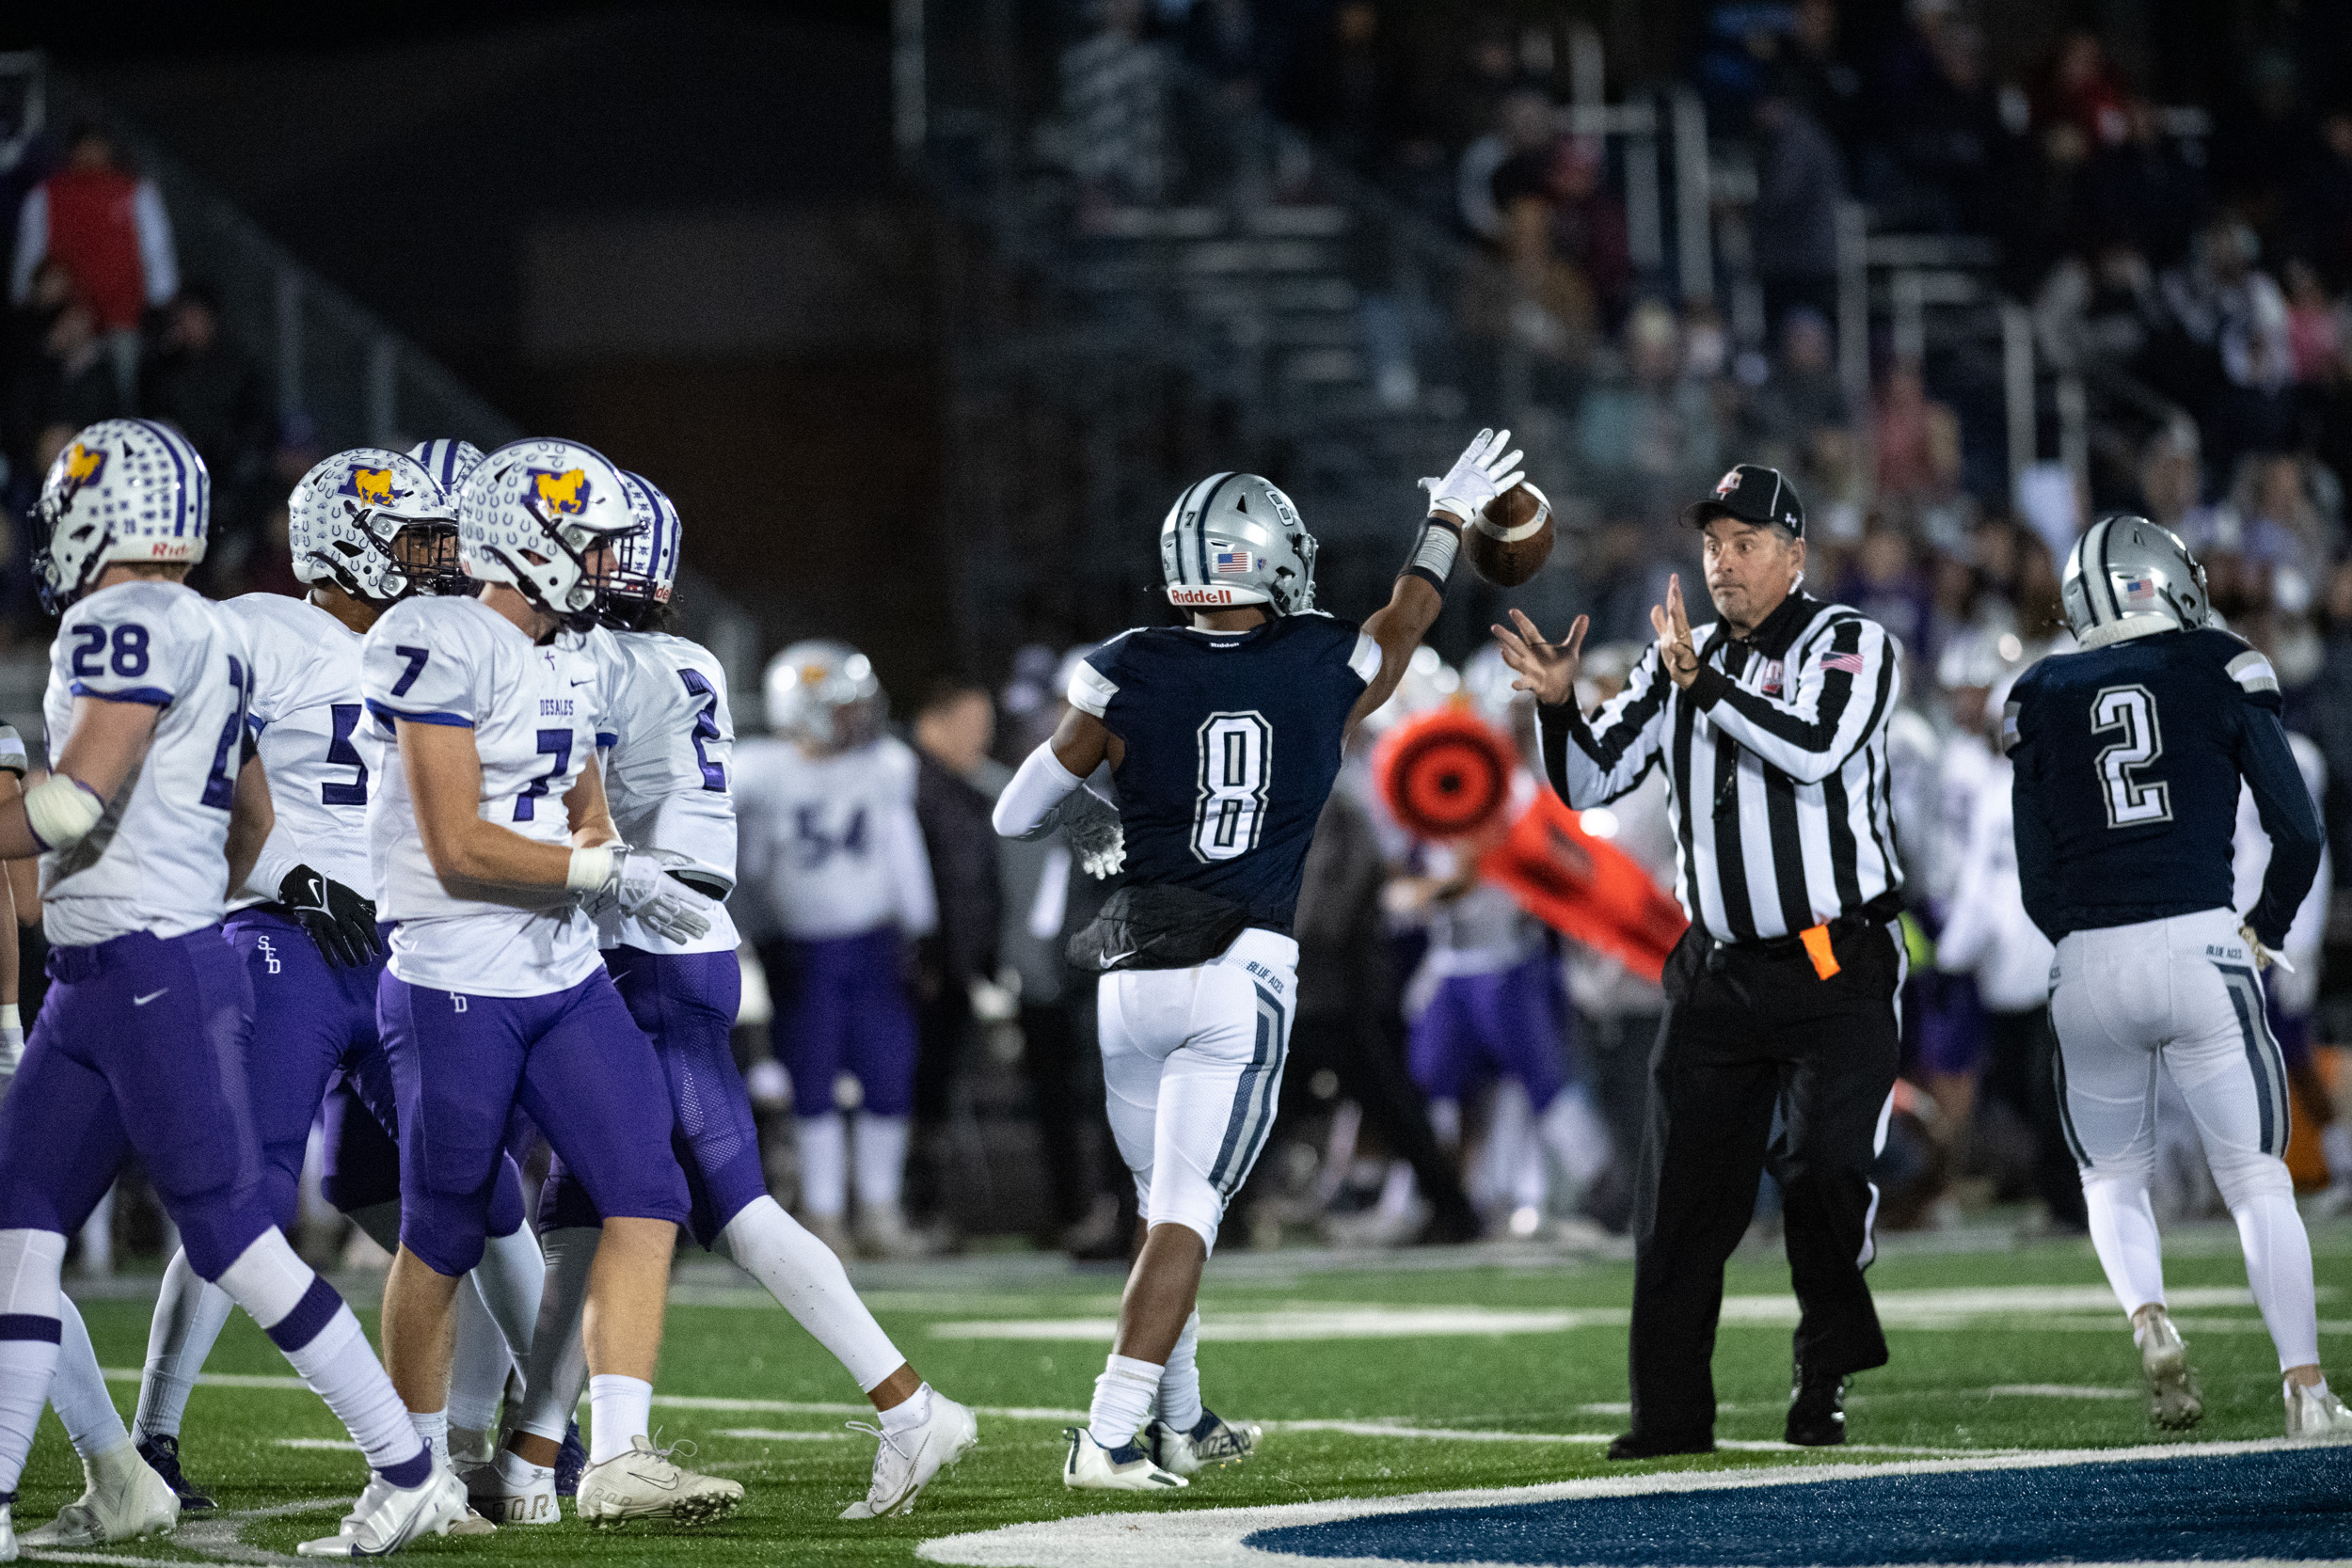 Devon Haley, number 8, of the Granville Blue Aces, tosses the football to a referee during the Blue Aces high school football playoff game against the St. Francis DeSales Stallions, in Granville, Ohio, on Friday, Nov. 5, 2021. The Blue Aces went on to win 19-12.